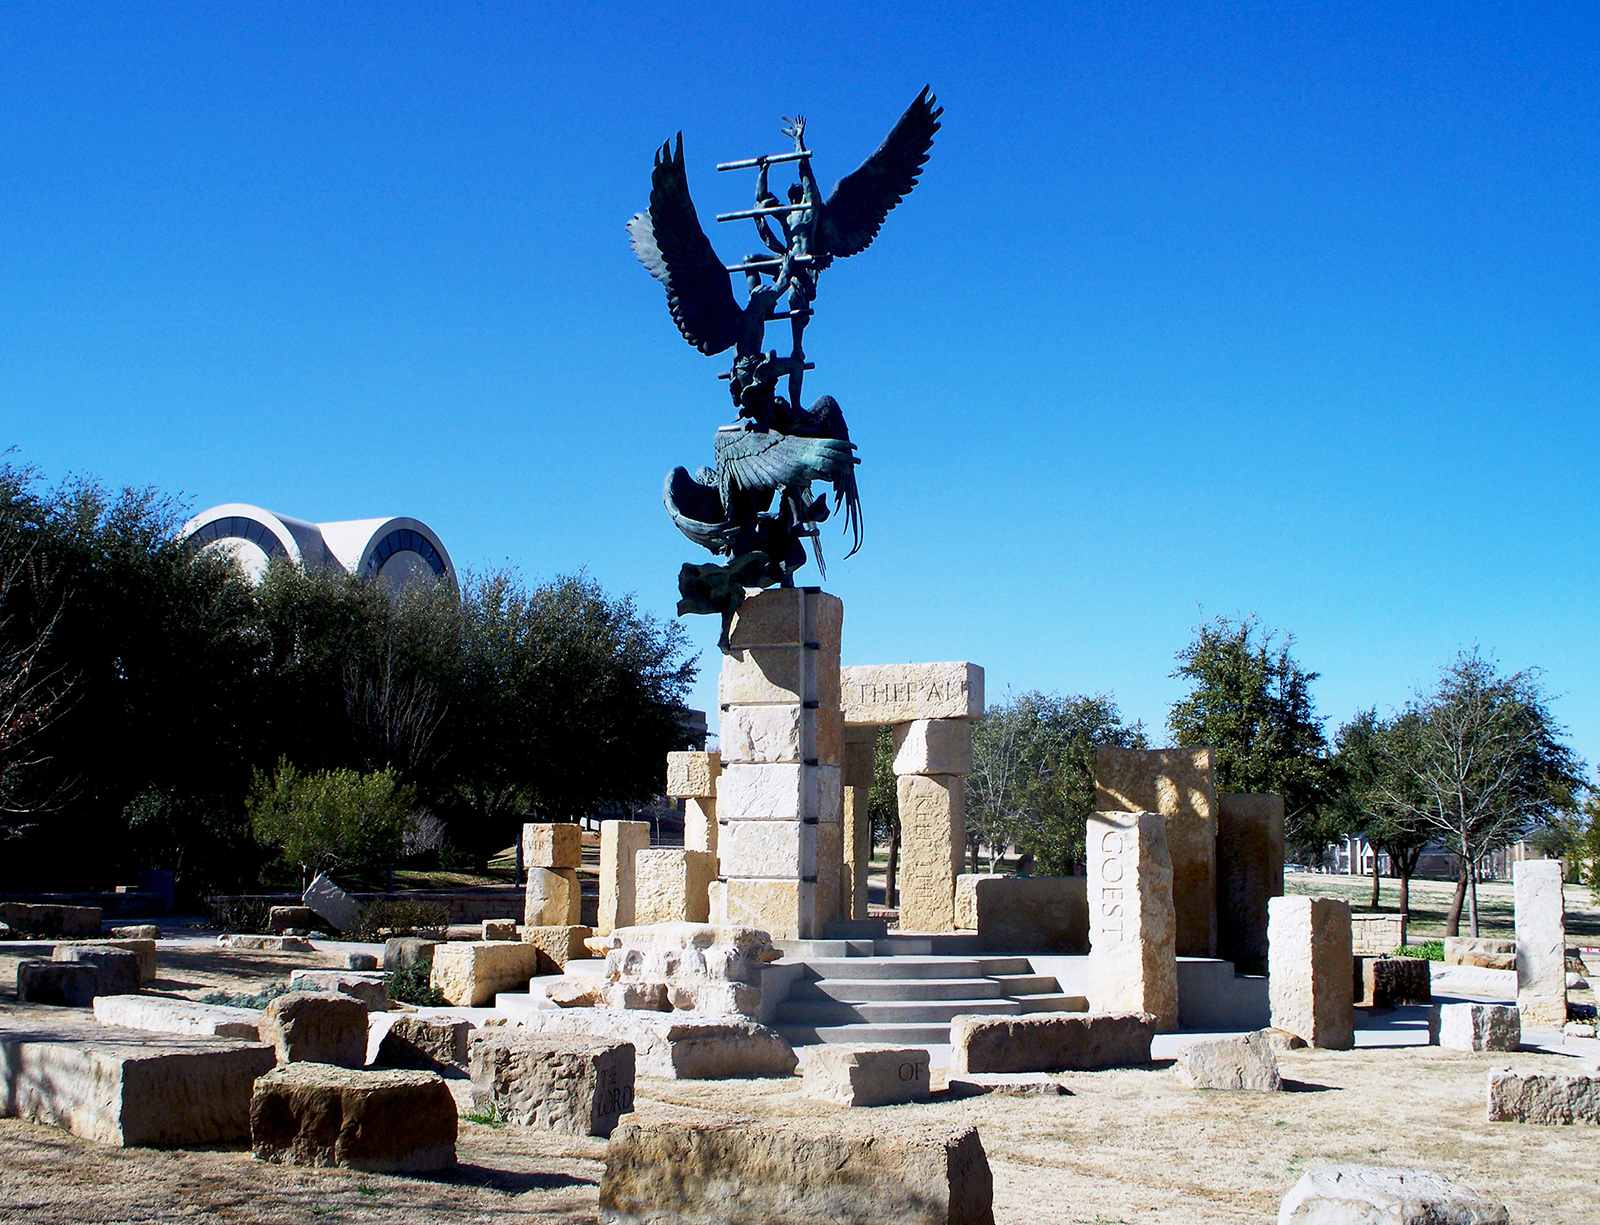 "Jacob's Dream" statue and artwork on the campus of Abilene Christian University. (Photo by Richard David Ramsey/Wikipedia/Creative Commons)